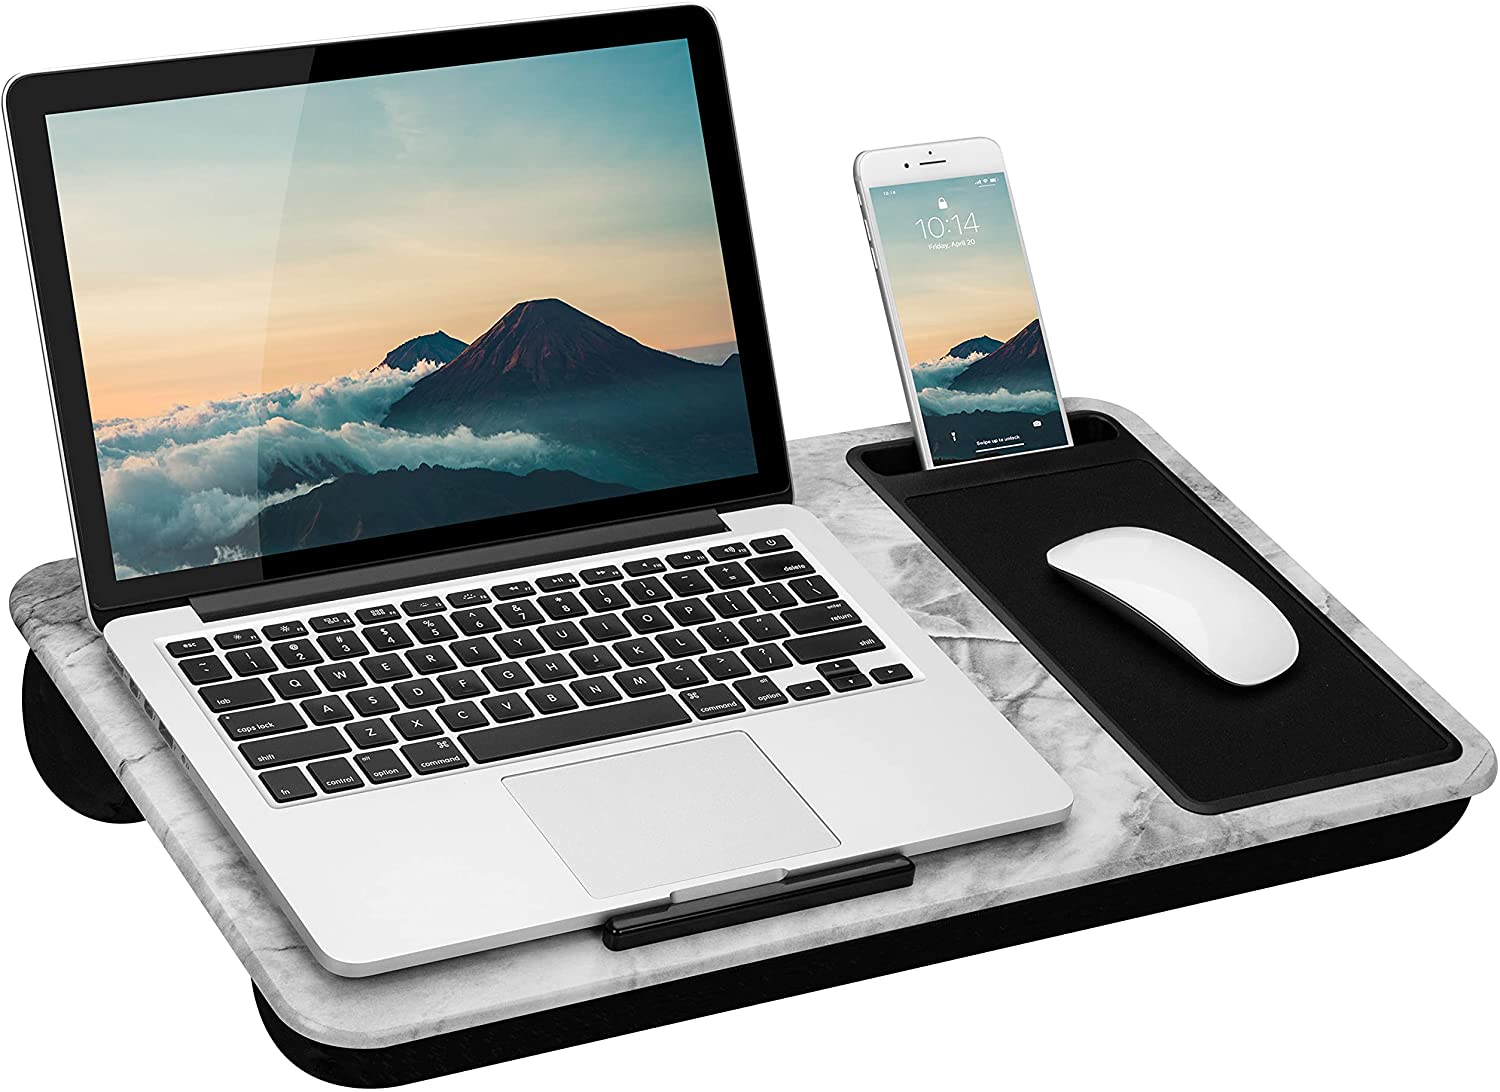 LapGear Home Office Lap Desk with Device Ledge, Mouse Pad, and Phone Holder - White Marble - Fits Up To 15.6 Inch Laptops